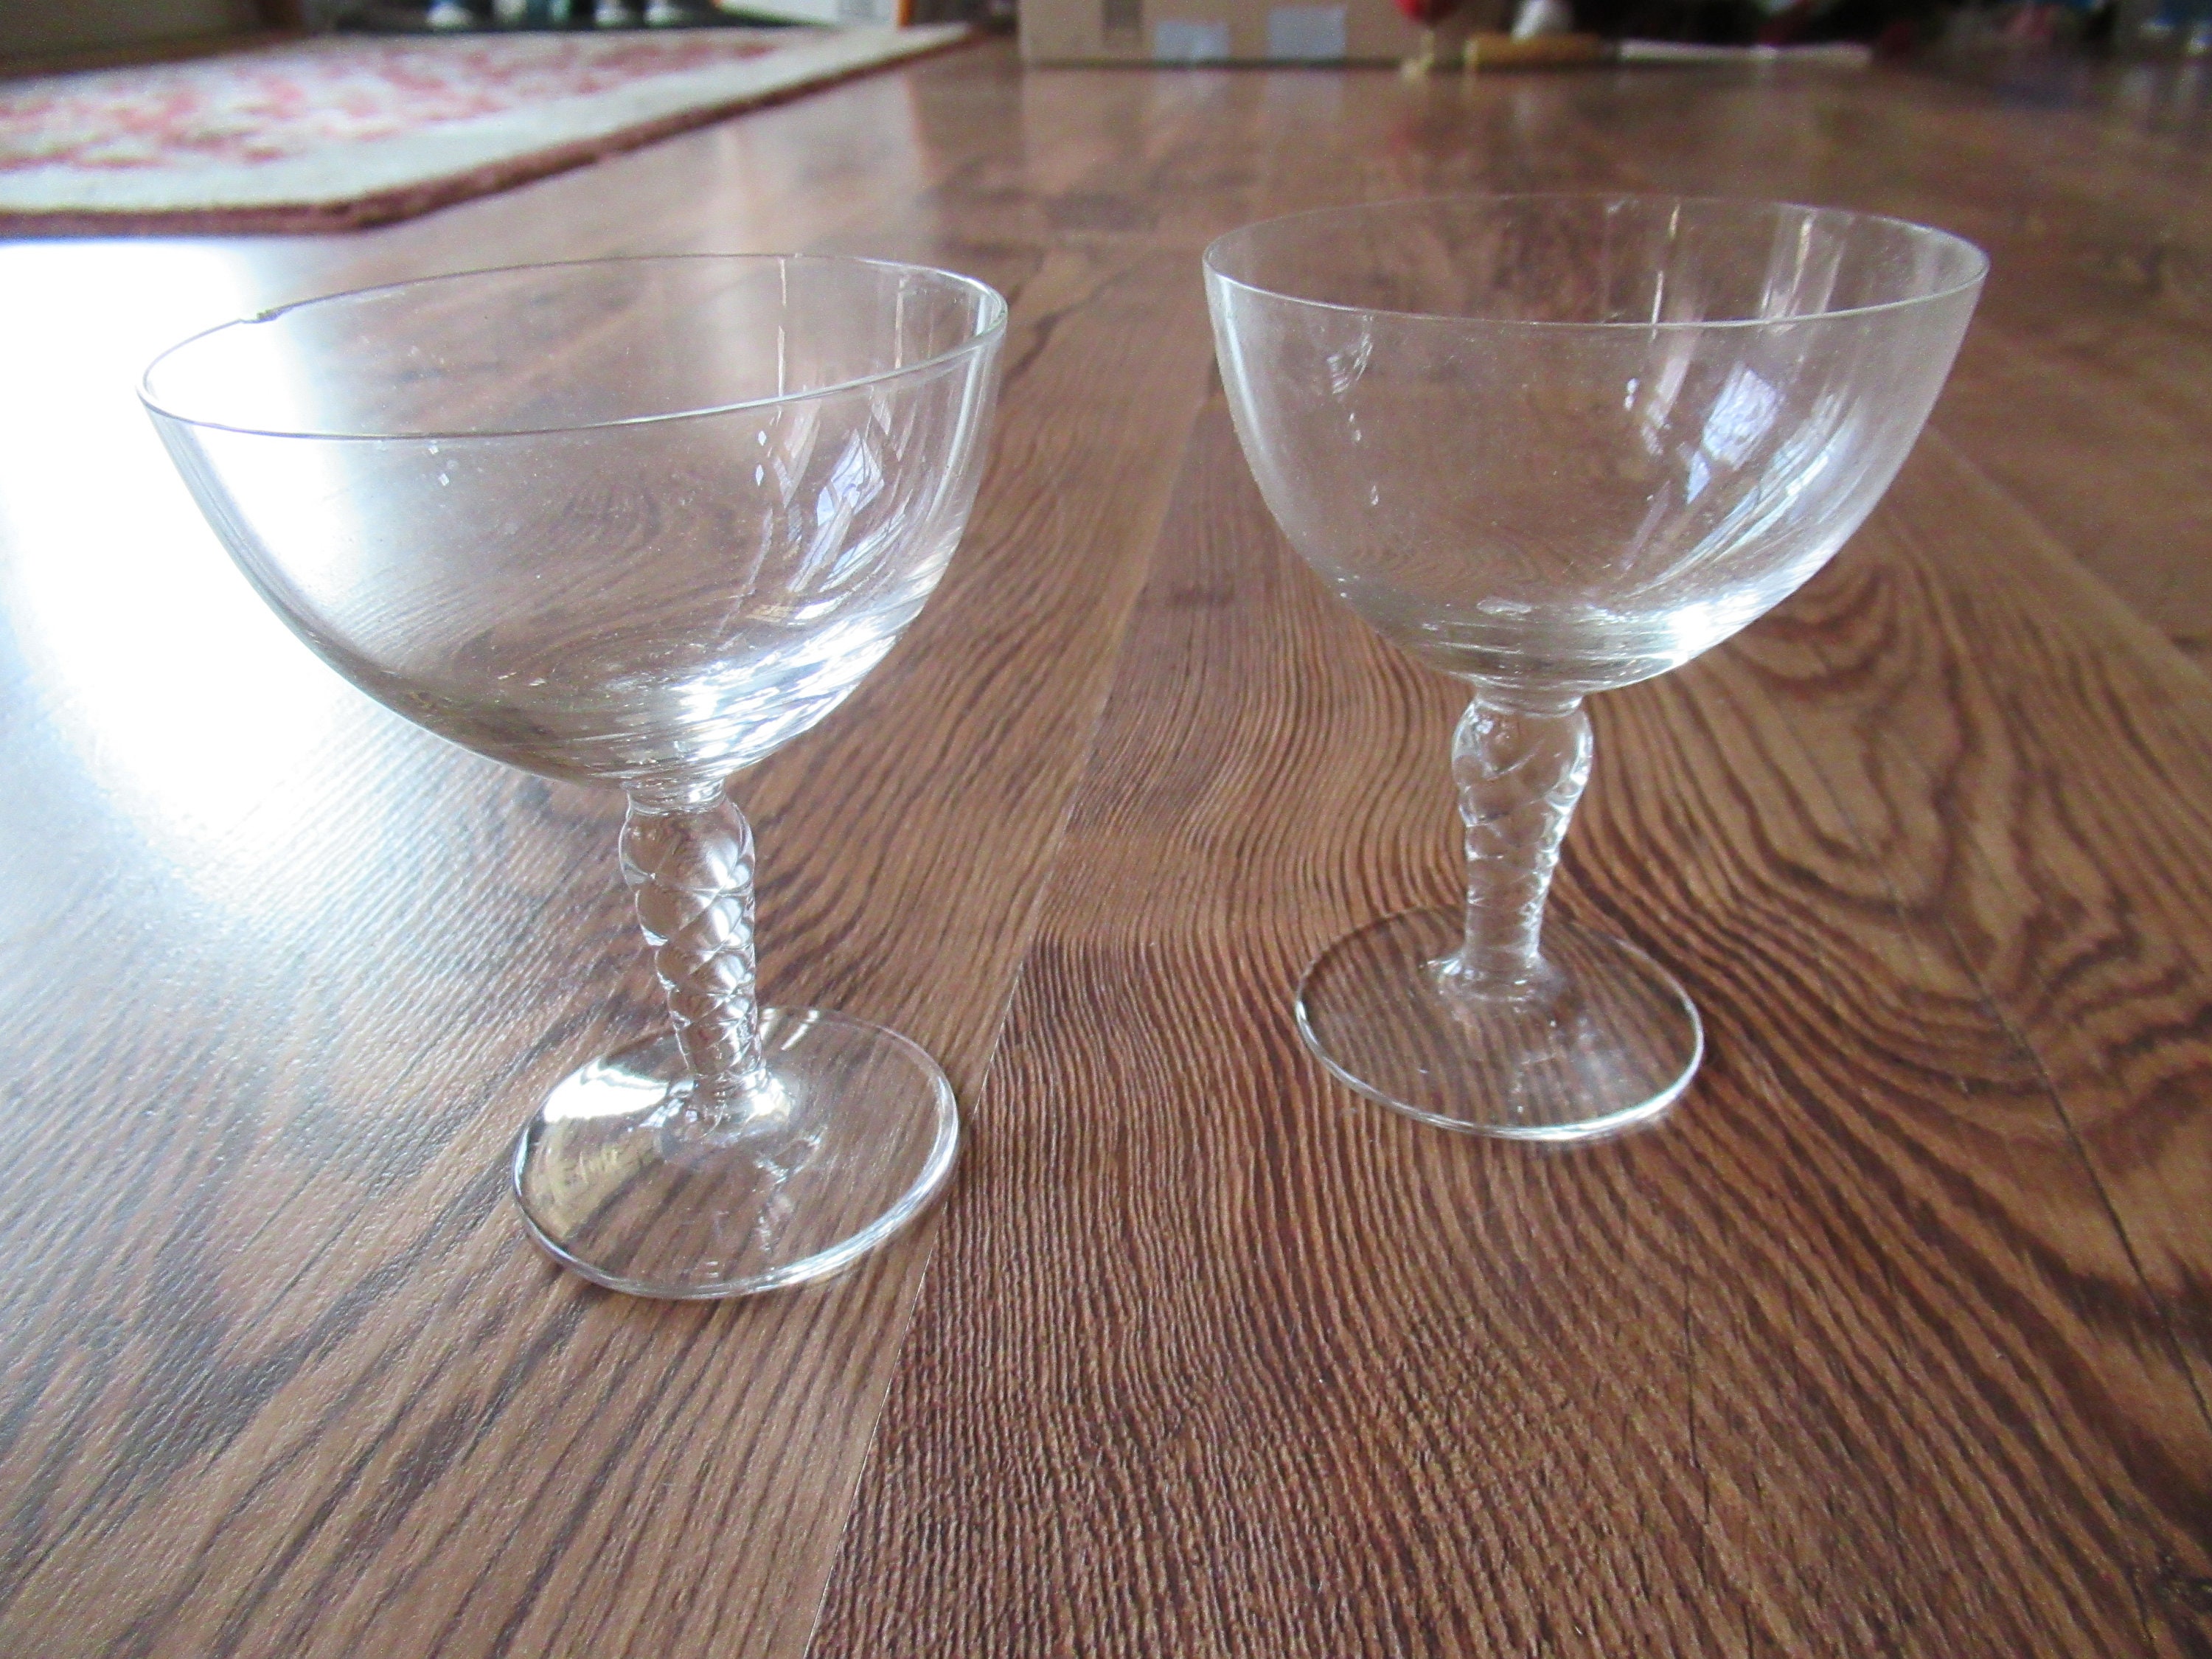 The Short-Stem Wine Glass—the Tavern Glass—Is a Feeling